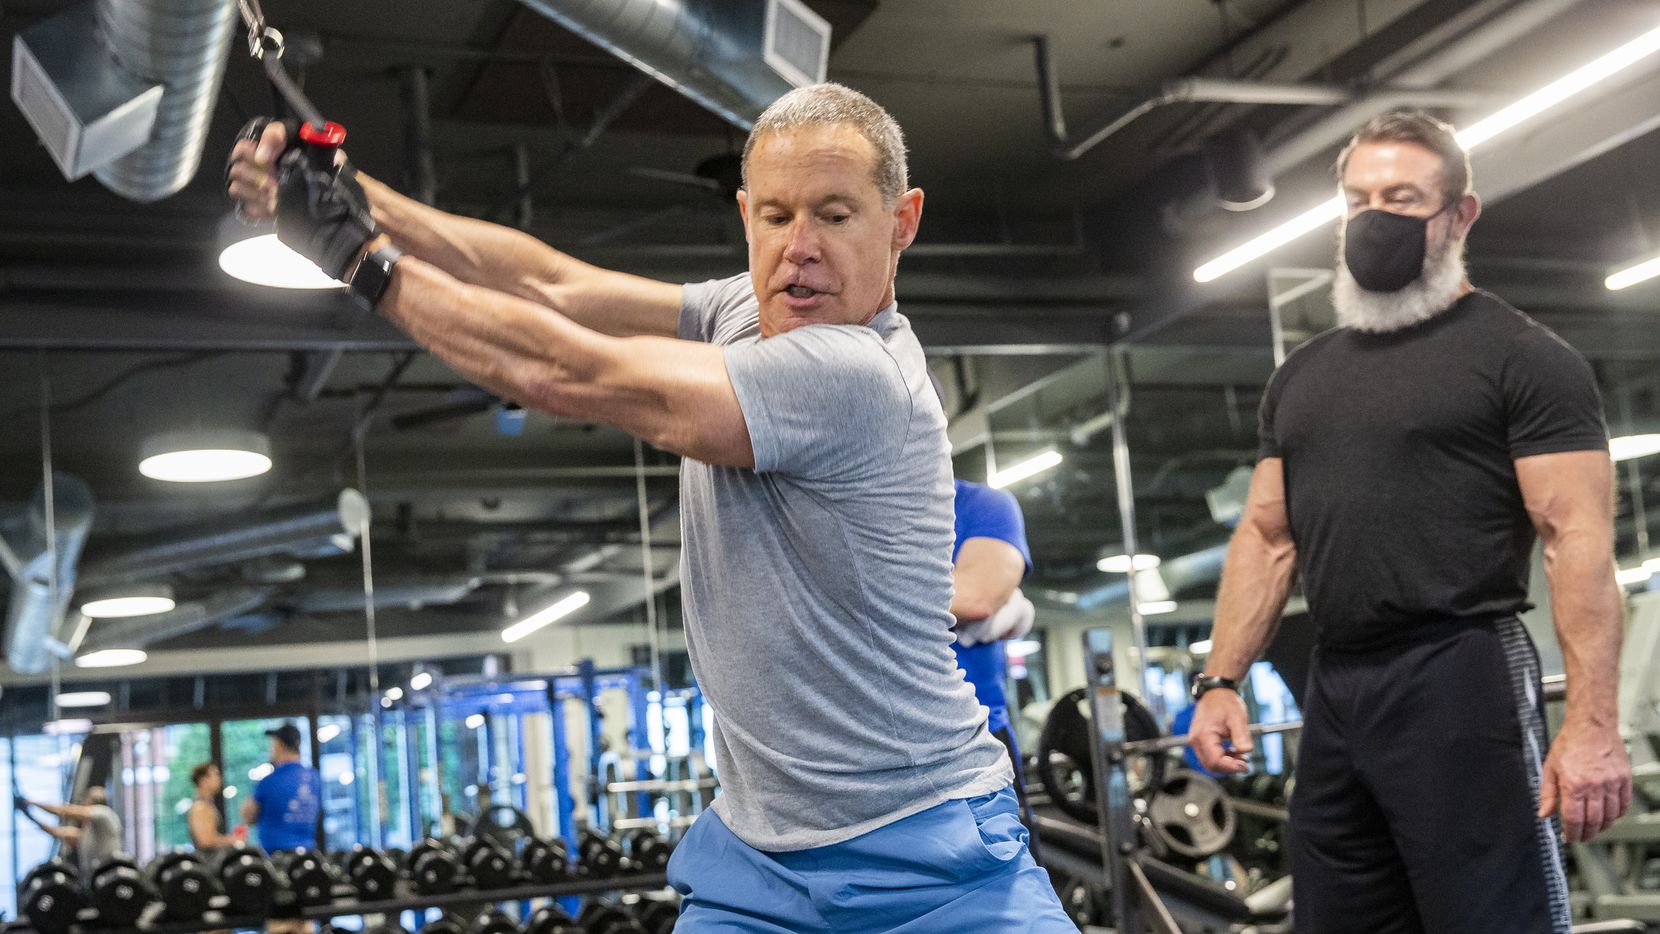 Bill Kritzer works out with Trophy Fitness trainer John Gordon at the Uptown gym on May 18, 2020 in Dallas. Kritzer said he kept active by doing a lot of cardio, running, and push-ups while the gym was closed.